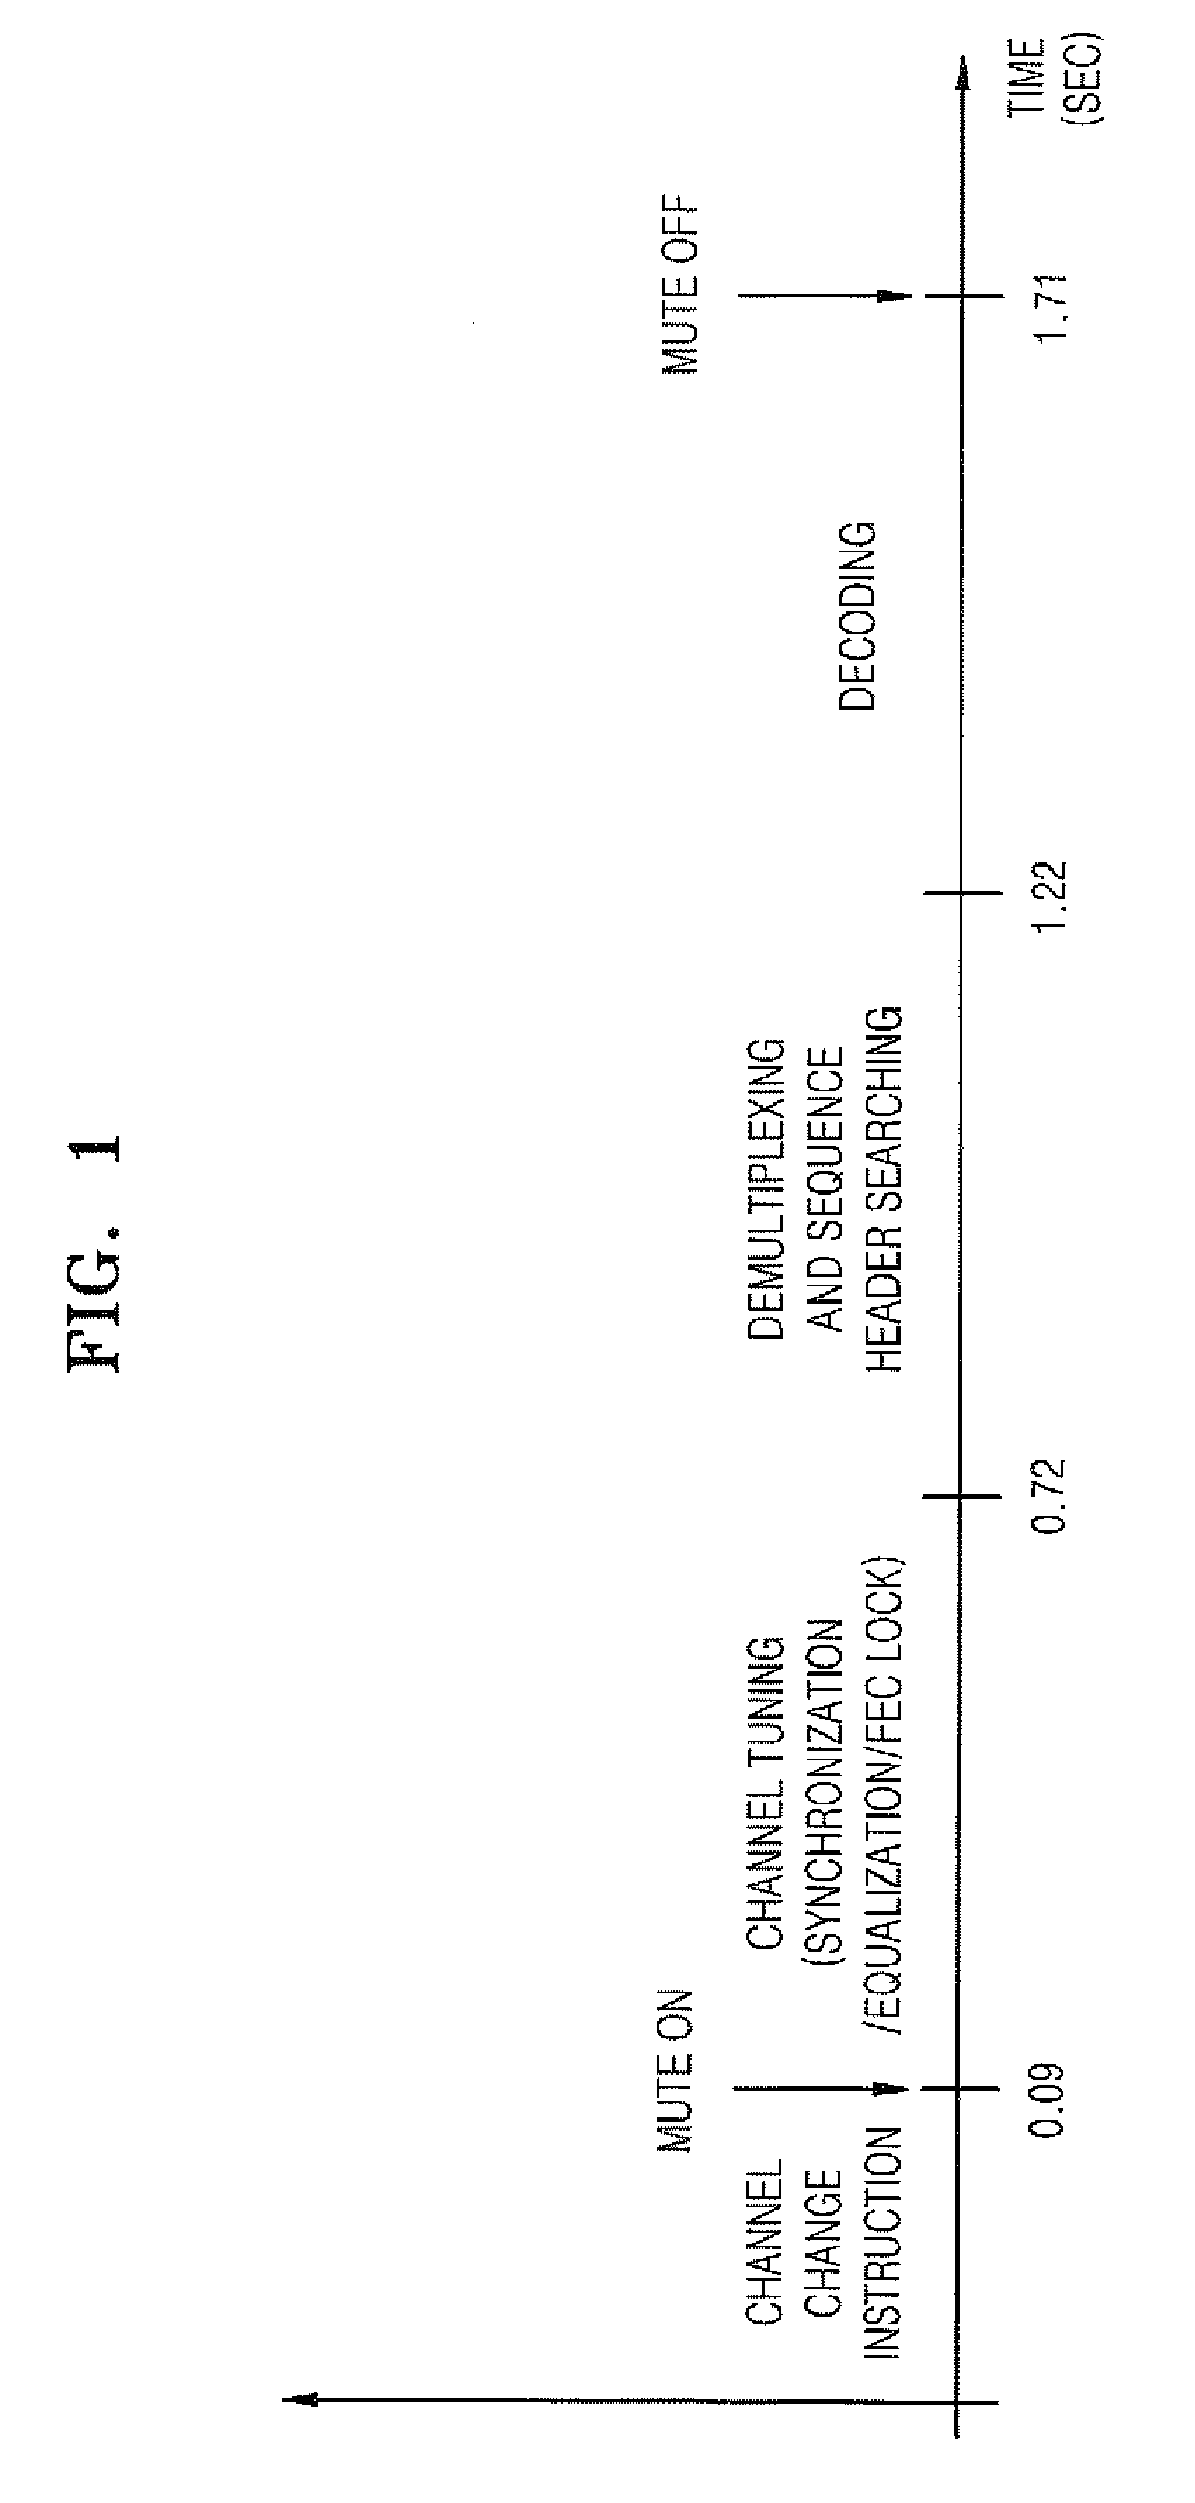 Method of improving channel switching speed in digital television receiver and the digital television receiver